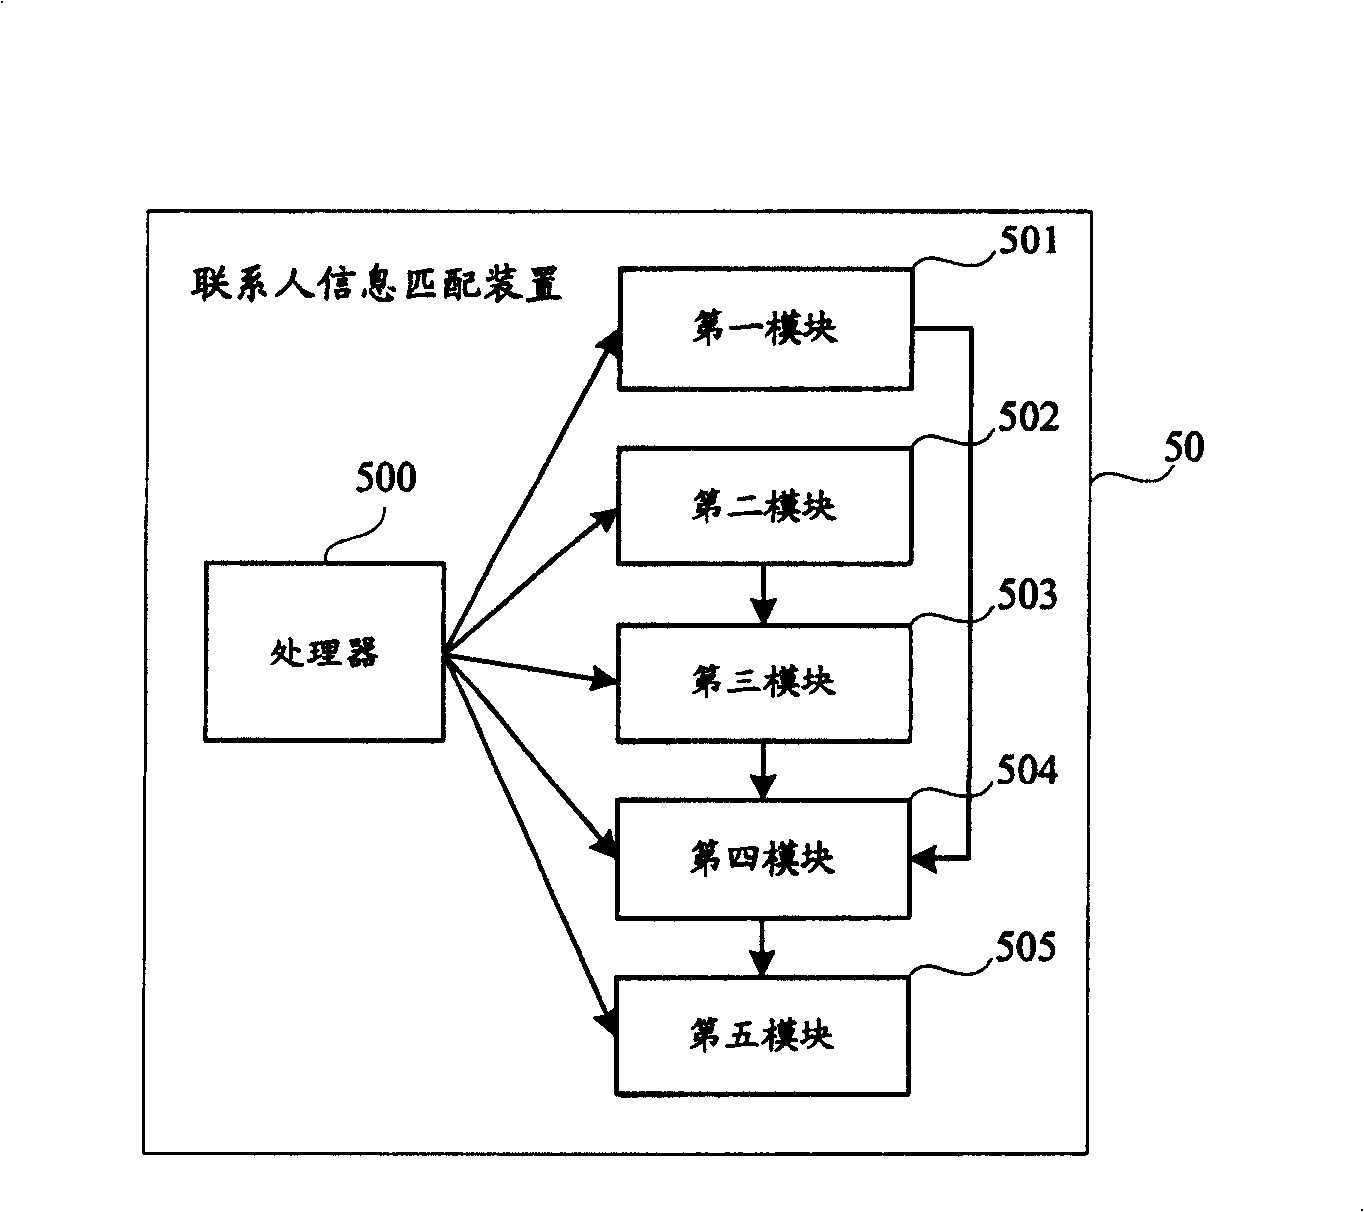 Method and apparatus for matching associated person information